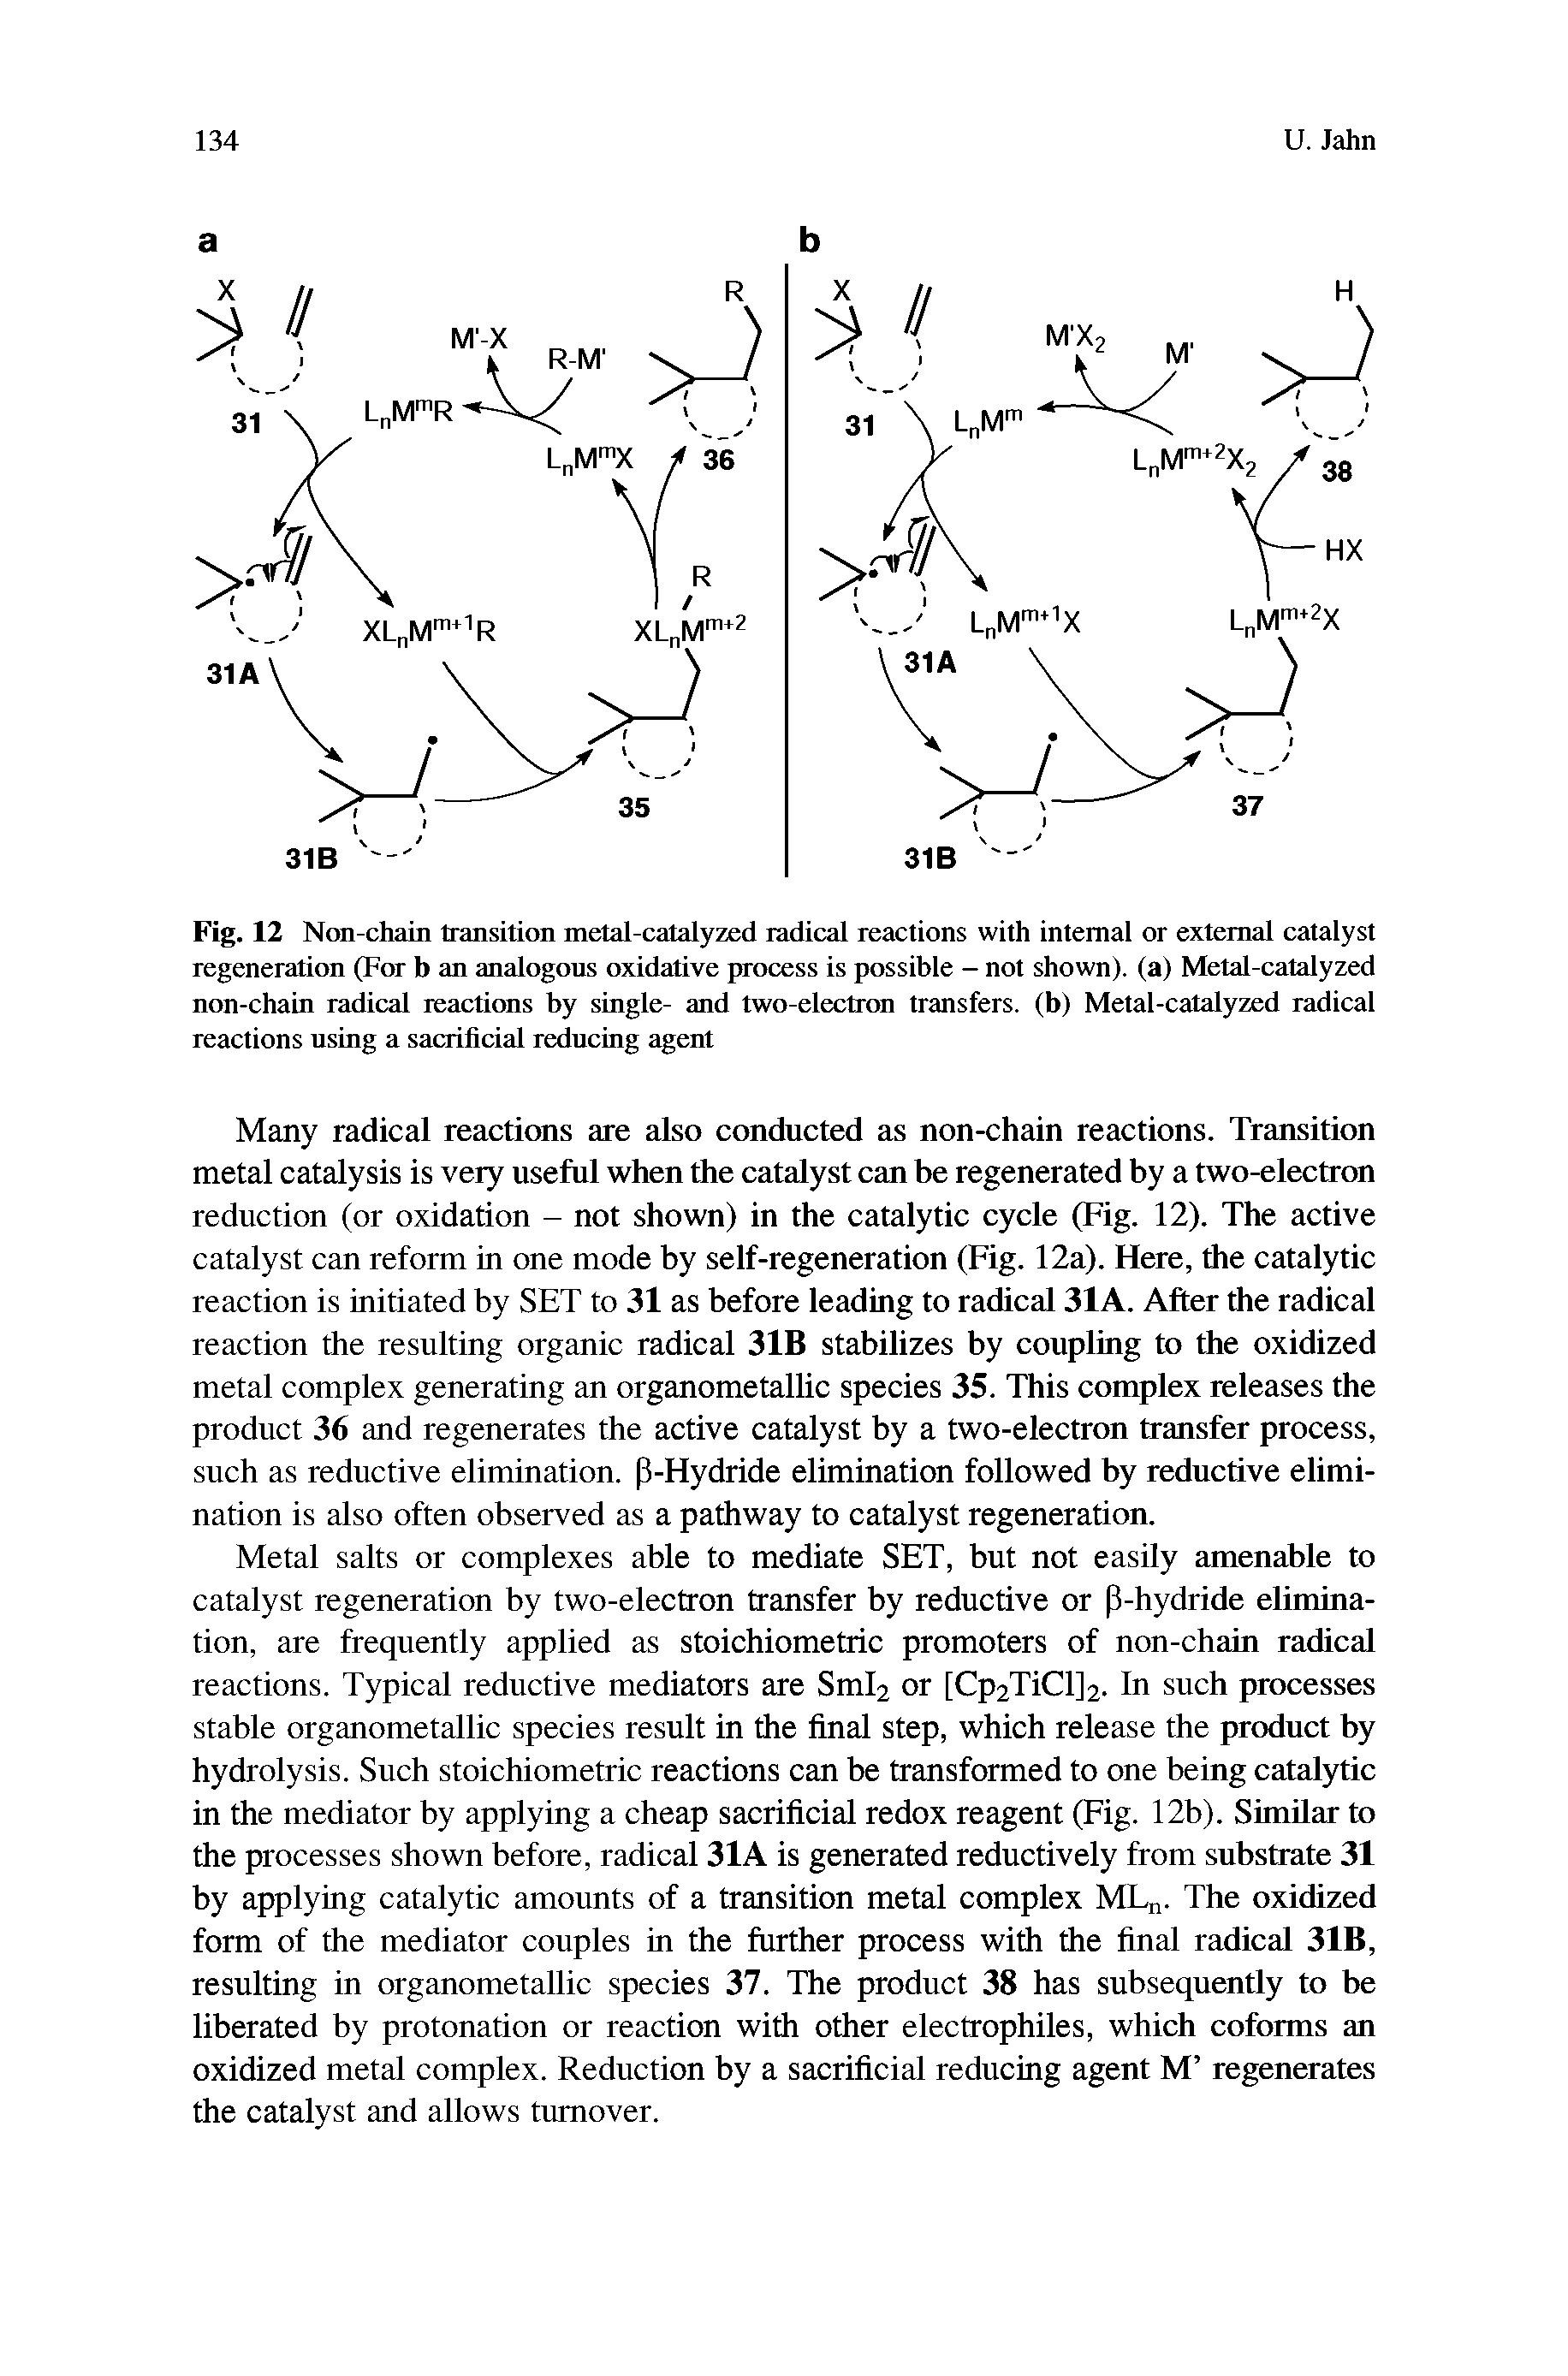 Fig. 12 Non-chain transition metal-catalyzed radical reactions with internal or external catalyst regeneration (For b an analogous oxidative process is possible - not shown), (a) Metal-catalyzed non-chain radical reactions by single- and two-electron transfers, (b) Metal-catalyzed radical reactions using a sacrificial reducing agent...